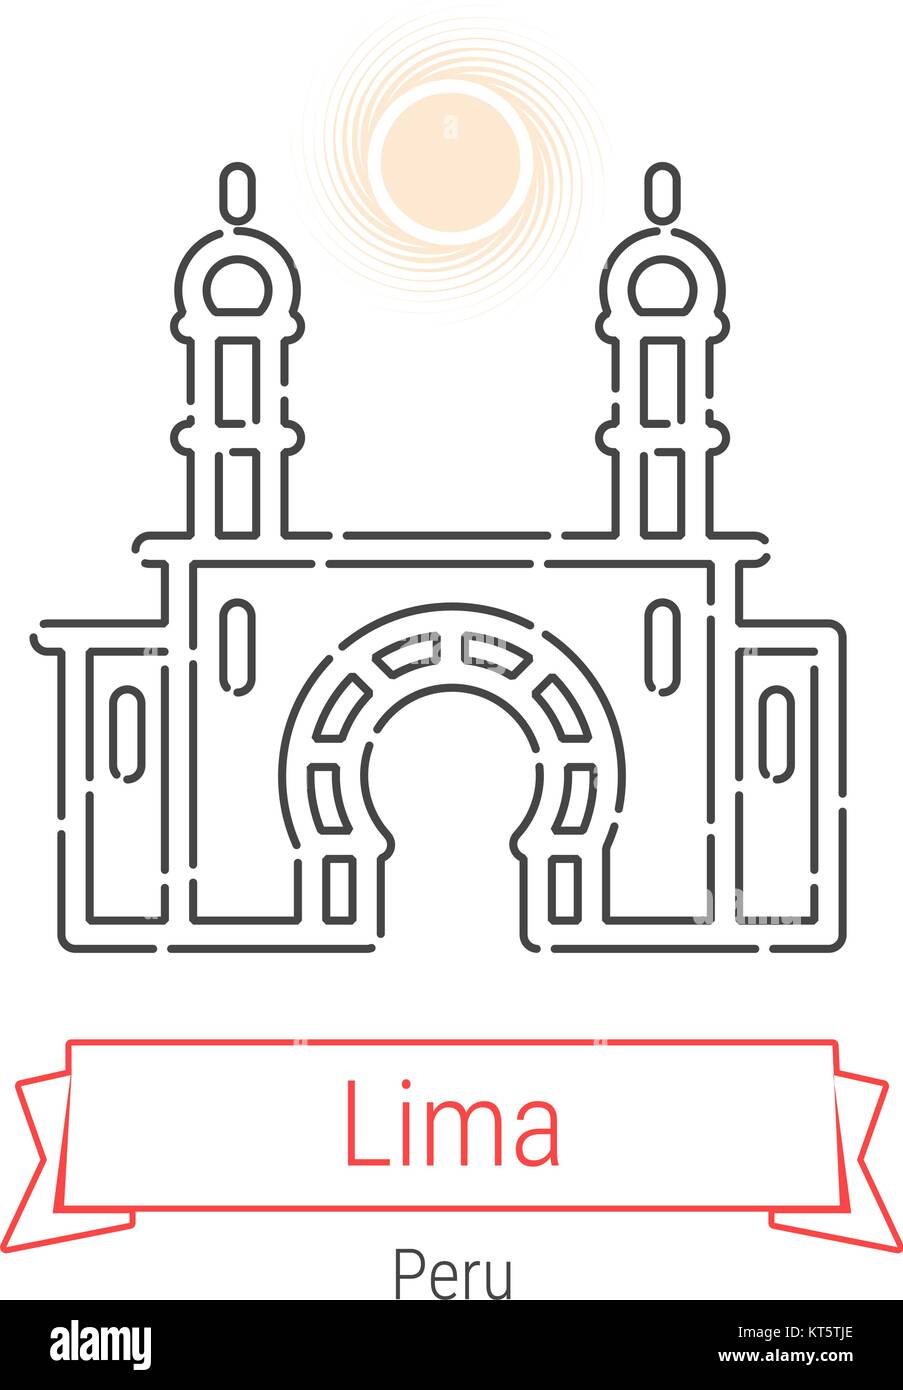 Lima, Peru Vector Line Icon with Red Ribbon Isolated on White. Lima Landmark - Emblem - Print - Label - Symbol. Park of Friendship Pictogram Stock Vector